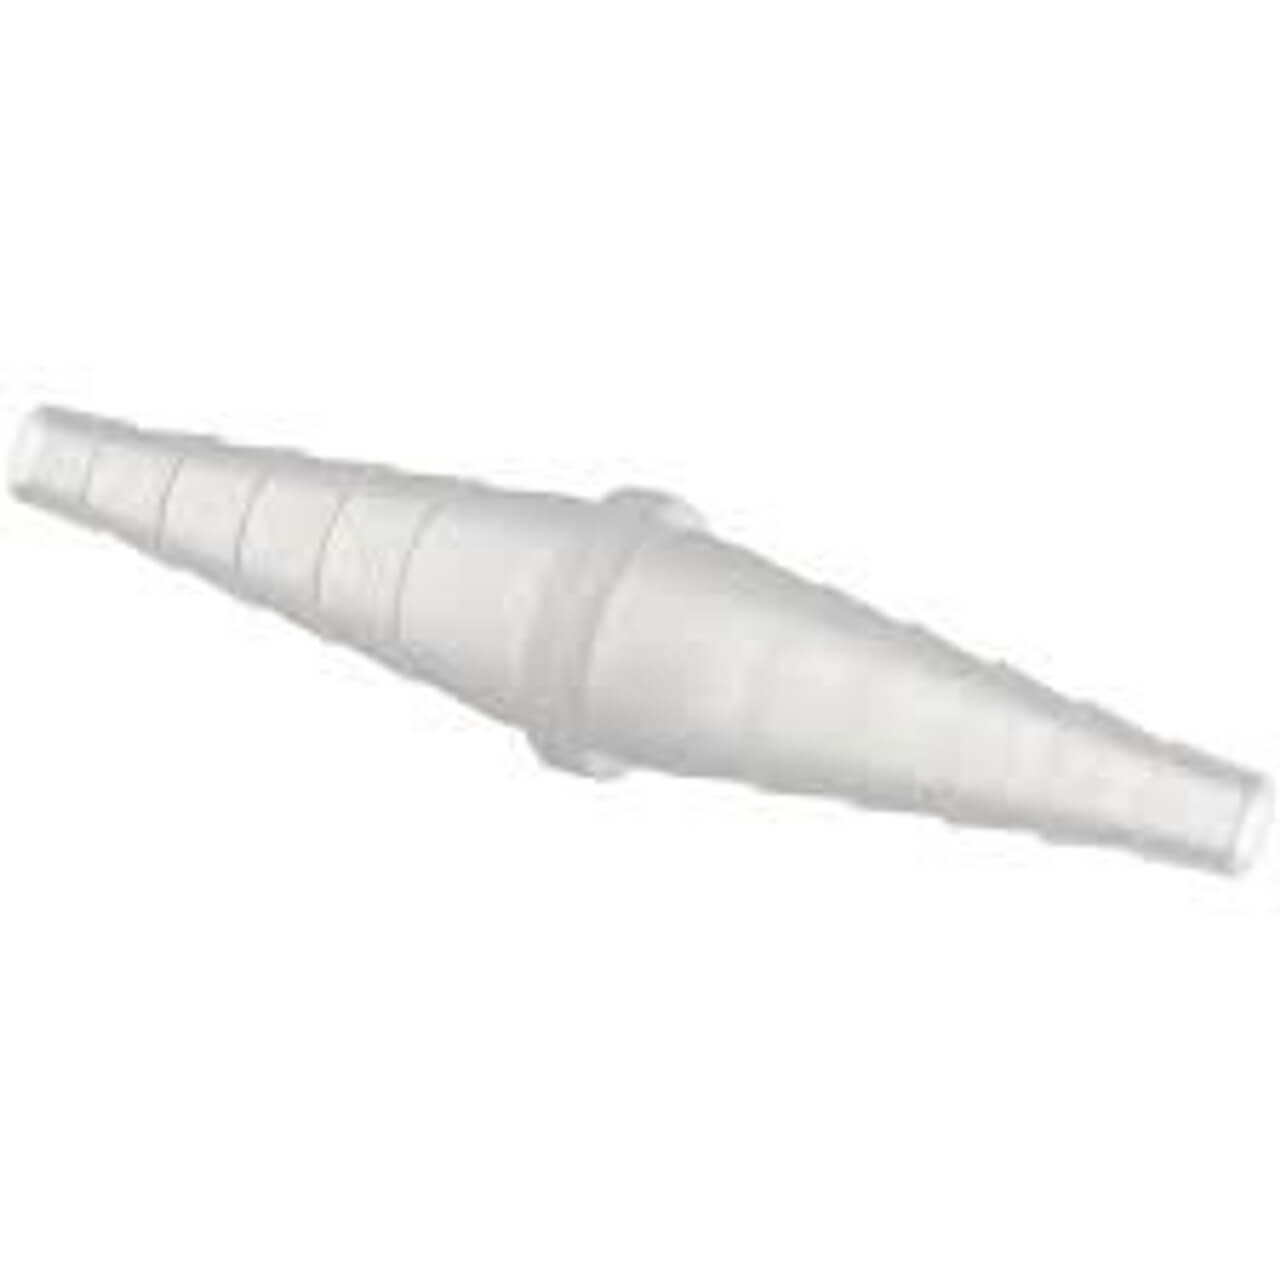 Colon Tube - 16Fr x 6 inches Length with Connector